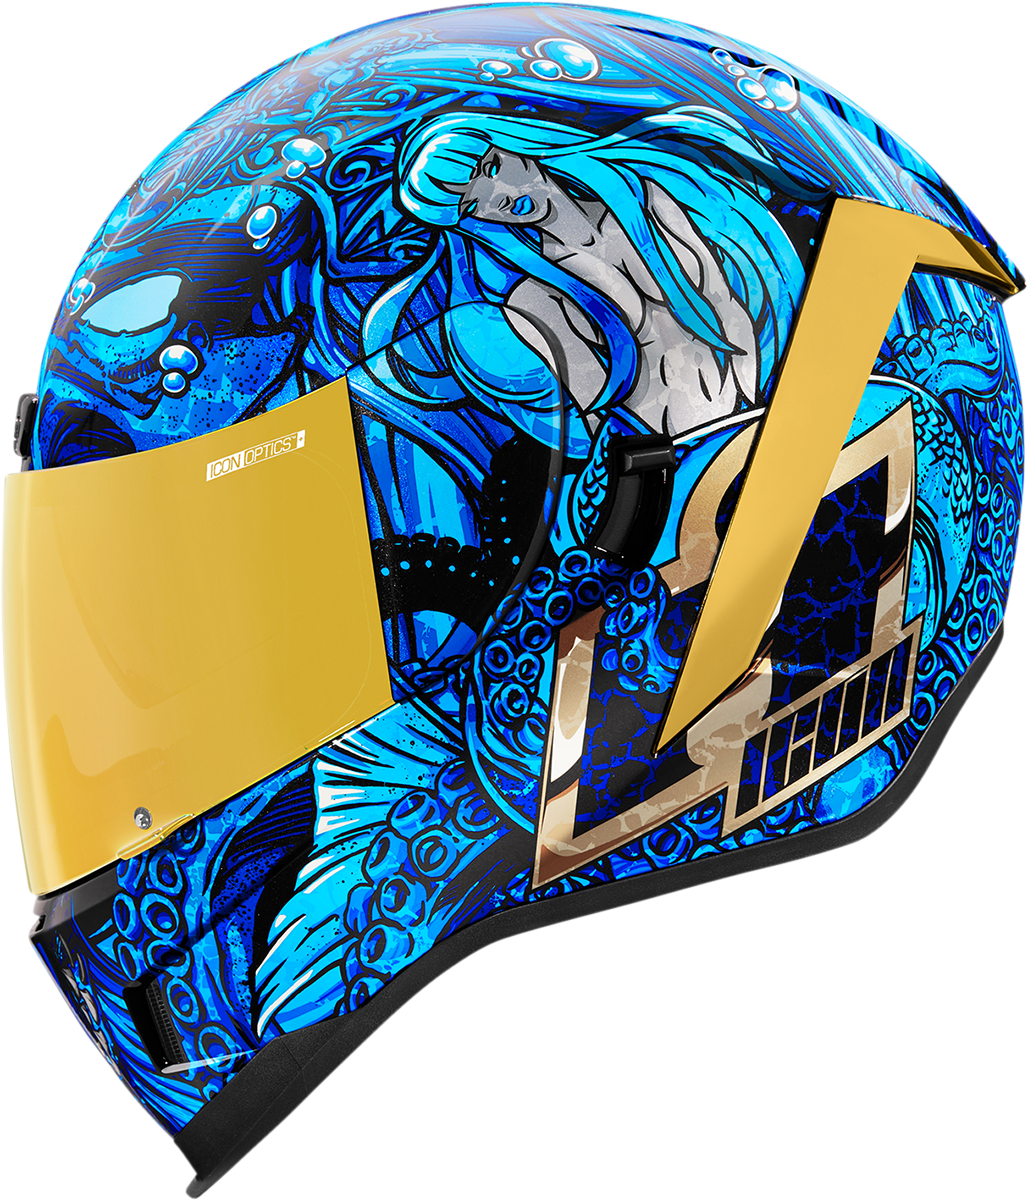 ICON Airform™ Helmet - Ships Company - Blue - Large 0101-13680